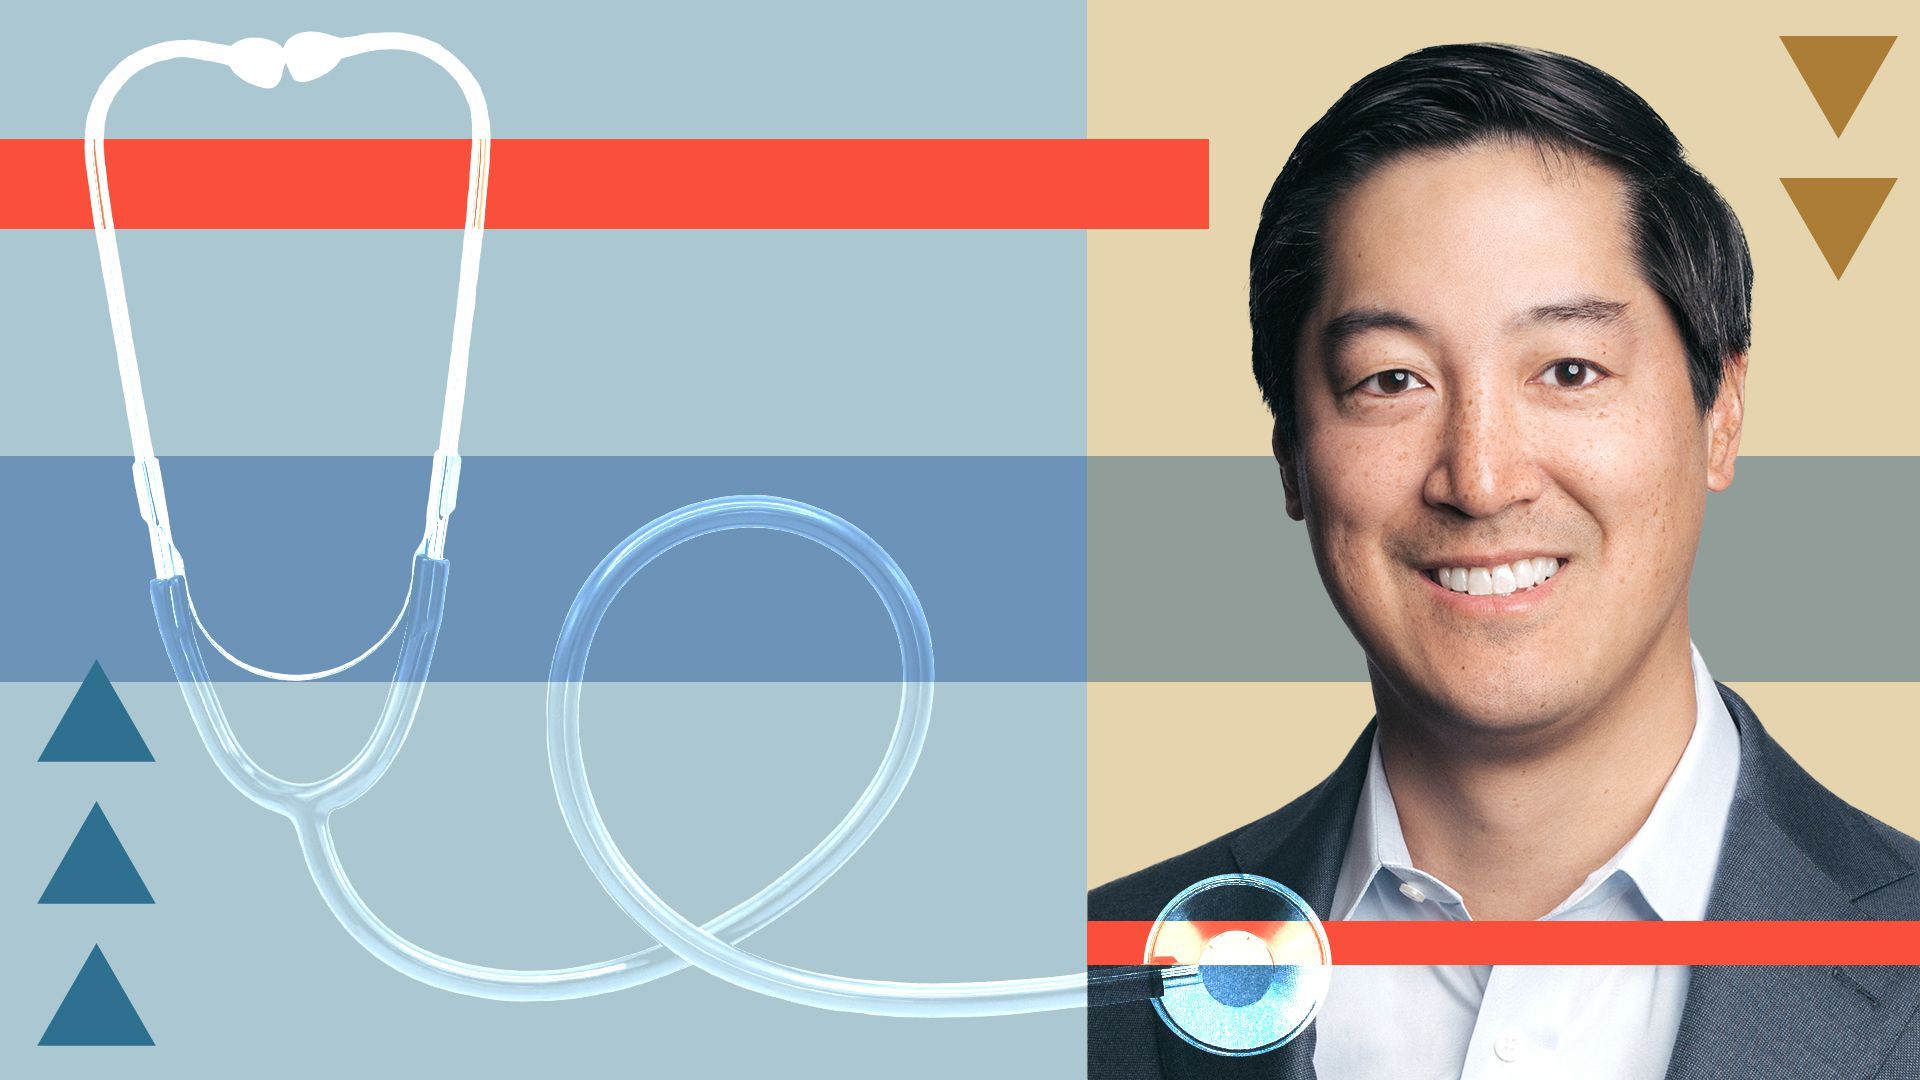 Photo illustration of Eric Liu, a stethoscope and abstract shapes.